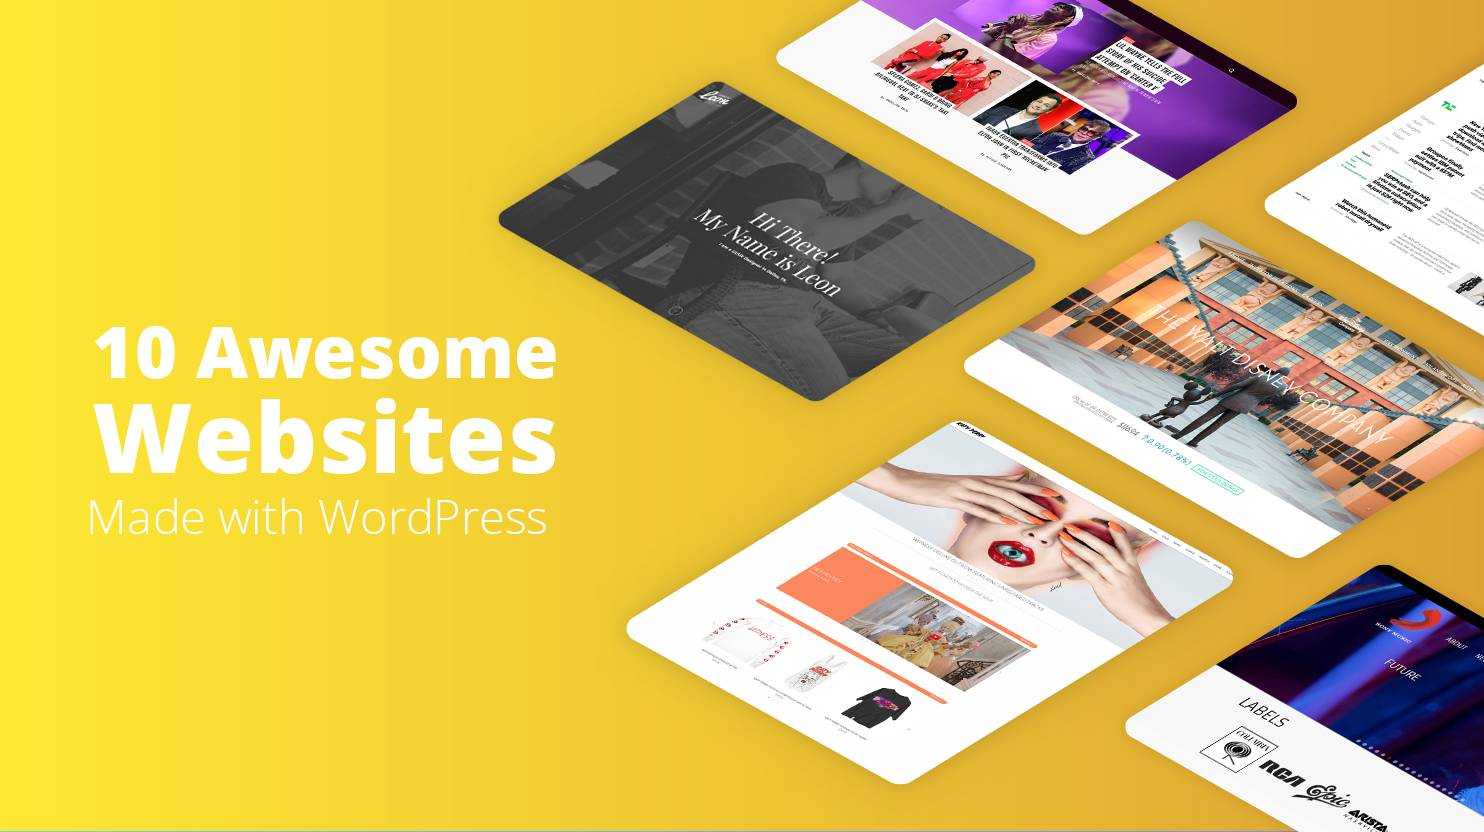 10 Awesome Websites Made with WordPress